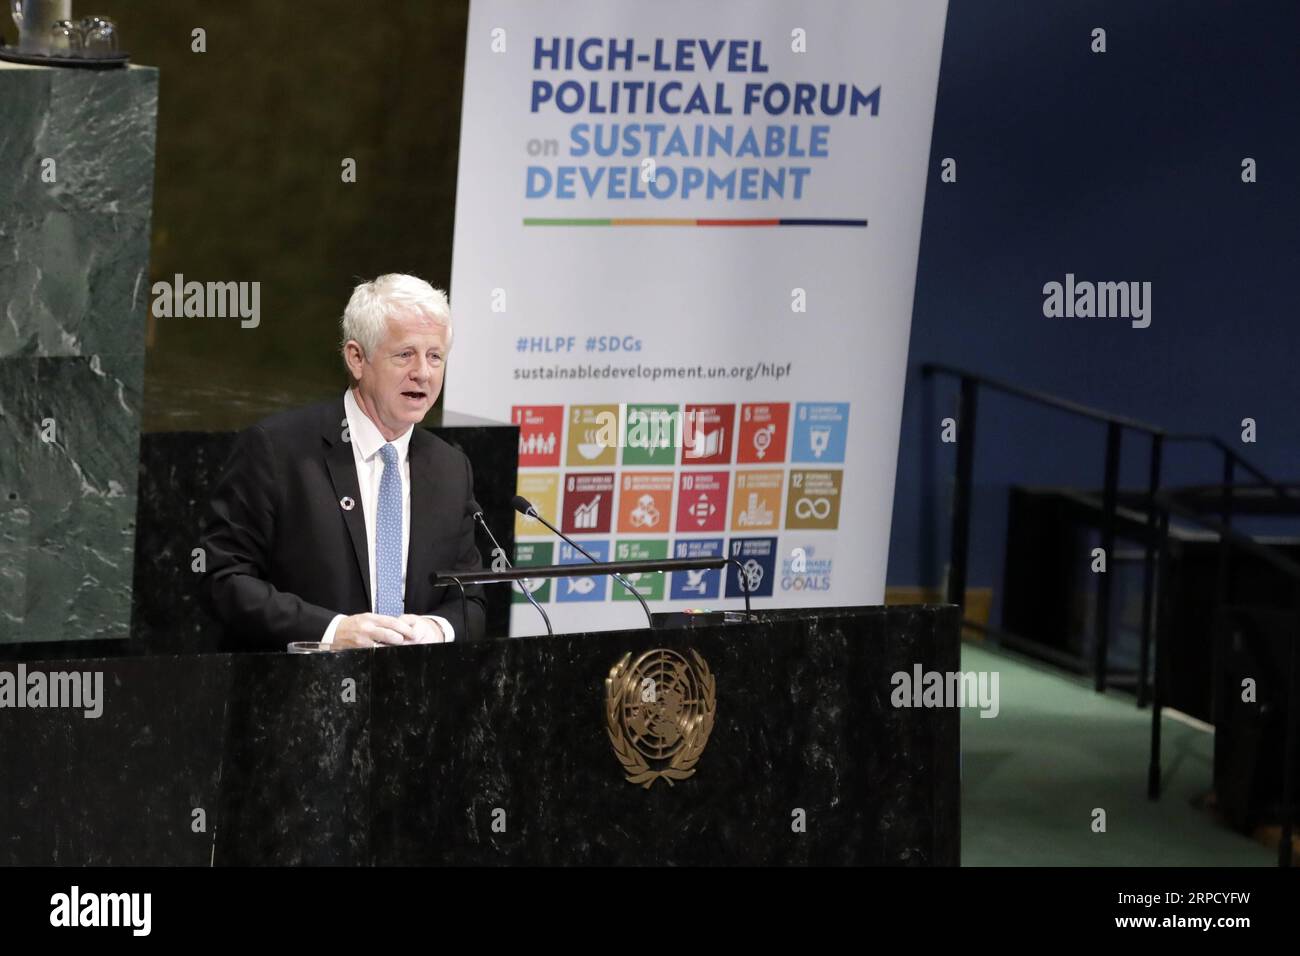 (190716) -- UNITED NATIONS, July 16, 2019 -- British screenwriter, producer and film director Richard Curtis addresses the opening ceremony of the High-level Segment of the Economic and Social Council (ECOSOC) Ministerial Segment of the High-level Political Forum on Sustainable Development at the UN headquarters in New York, July 16, 2019. United Nations Secretary-General Antonio Guterres said Tuesday that shifting to a greener economy could create 24 million jobs globally by 2030. ) UN-ECOSOC-HIGH-LEVEL POLITICAL FORUM-SUSTAINABLE DEVELOPMENT LixMuzi PUBLICATIONxNOTxINxCHN Stock Photo